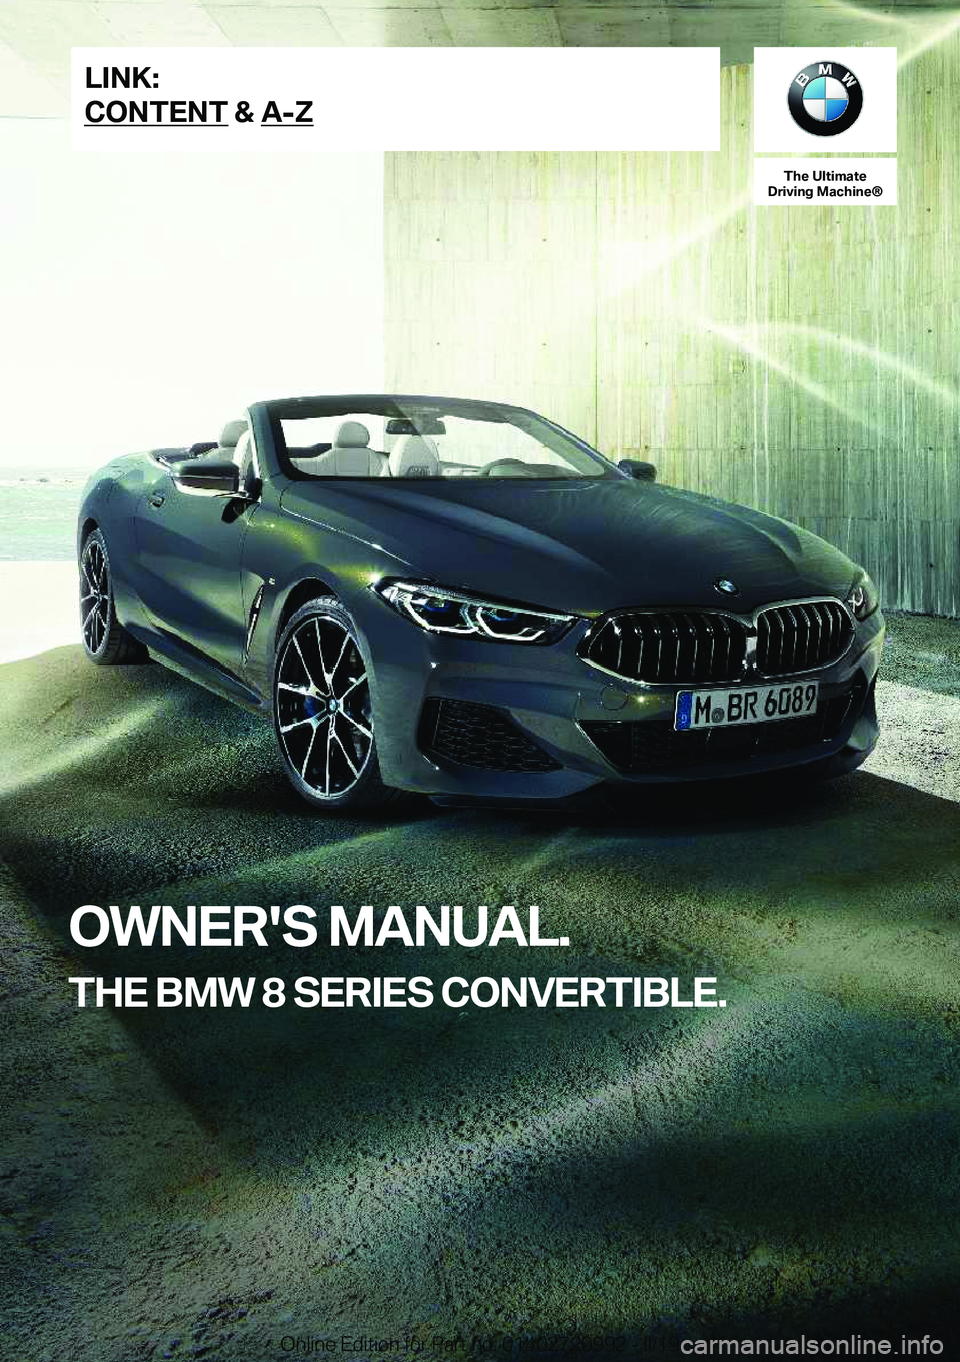 BMW 8 SERIES CONVERTIBLE 2020  Owners Manual �T�h�e��U�l�t�i�m�a�t�e
�D�r�i�v�i�n�g��M�a�c�h�i�n�e�n
�O�W�N�E�R�'�S��M�A�N�U�A�L�.
�T�H�E��B�M�W��8��S�E�R�I�E�S��C�O�N�V�E�R�T�I�B�L�E�.�L�I�N�K�:
�C�O�N�T�E�N�T��&��A�-�Z�O�n�l�i�n�e